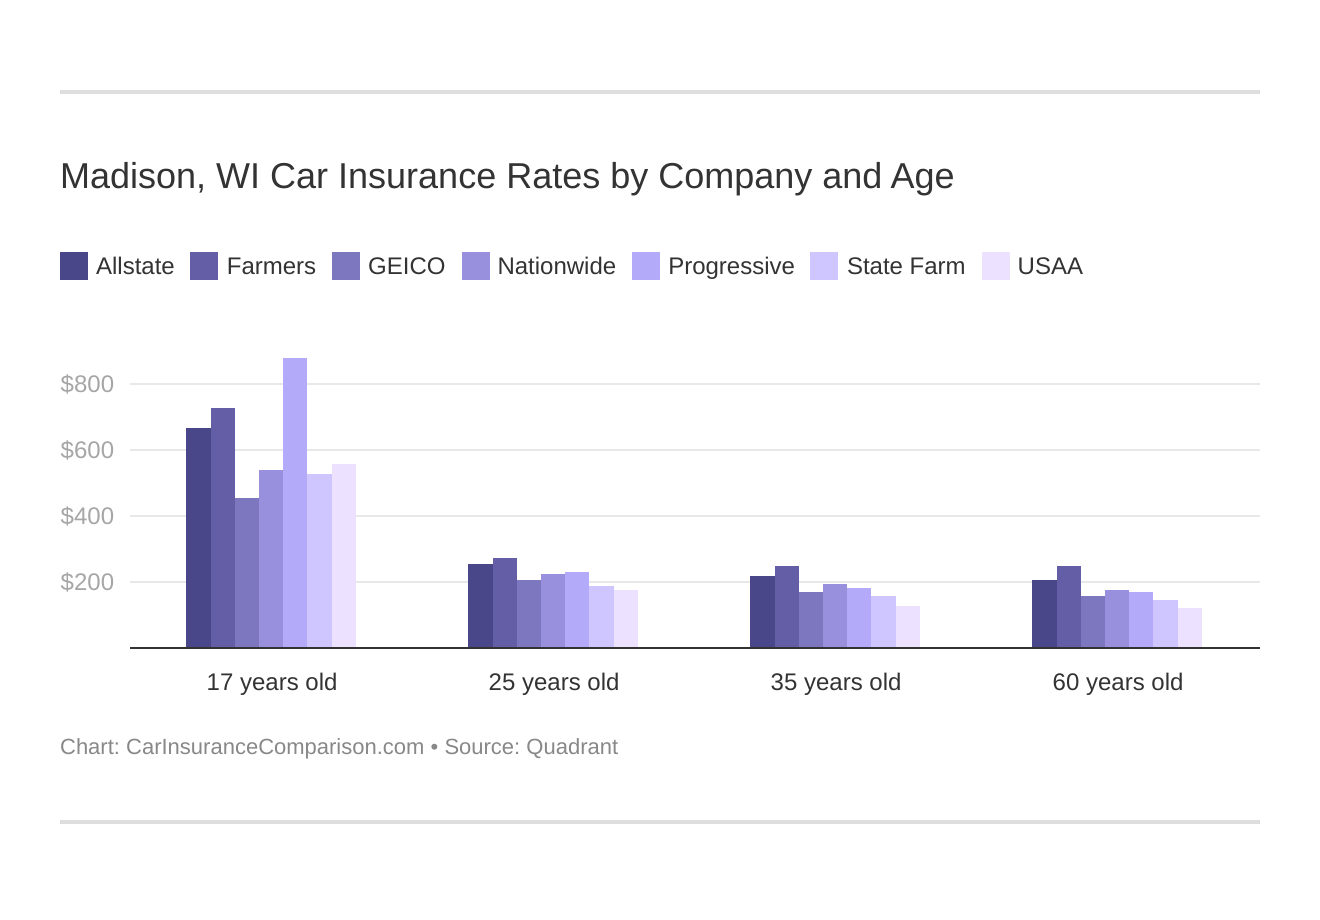 Madison, WI Car Insurance Rates by Company and Age